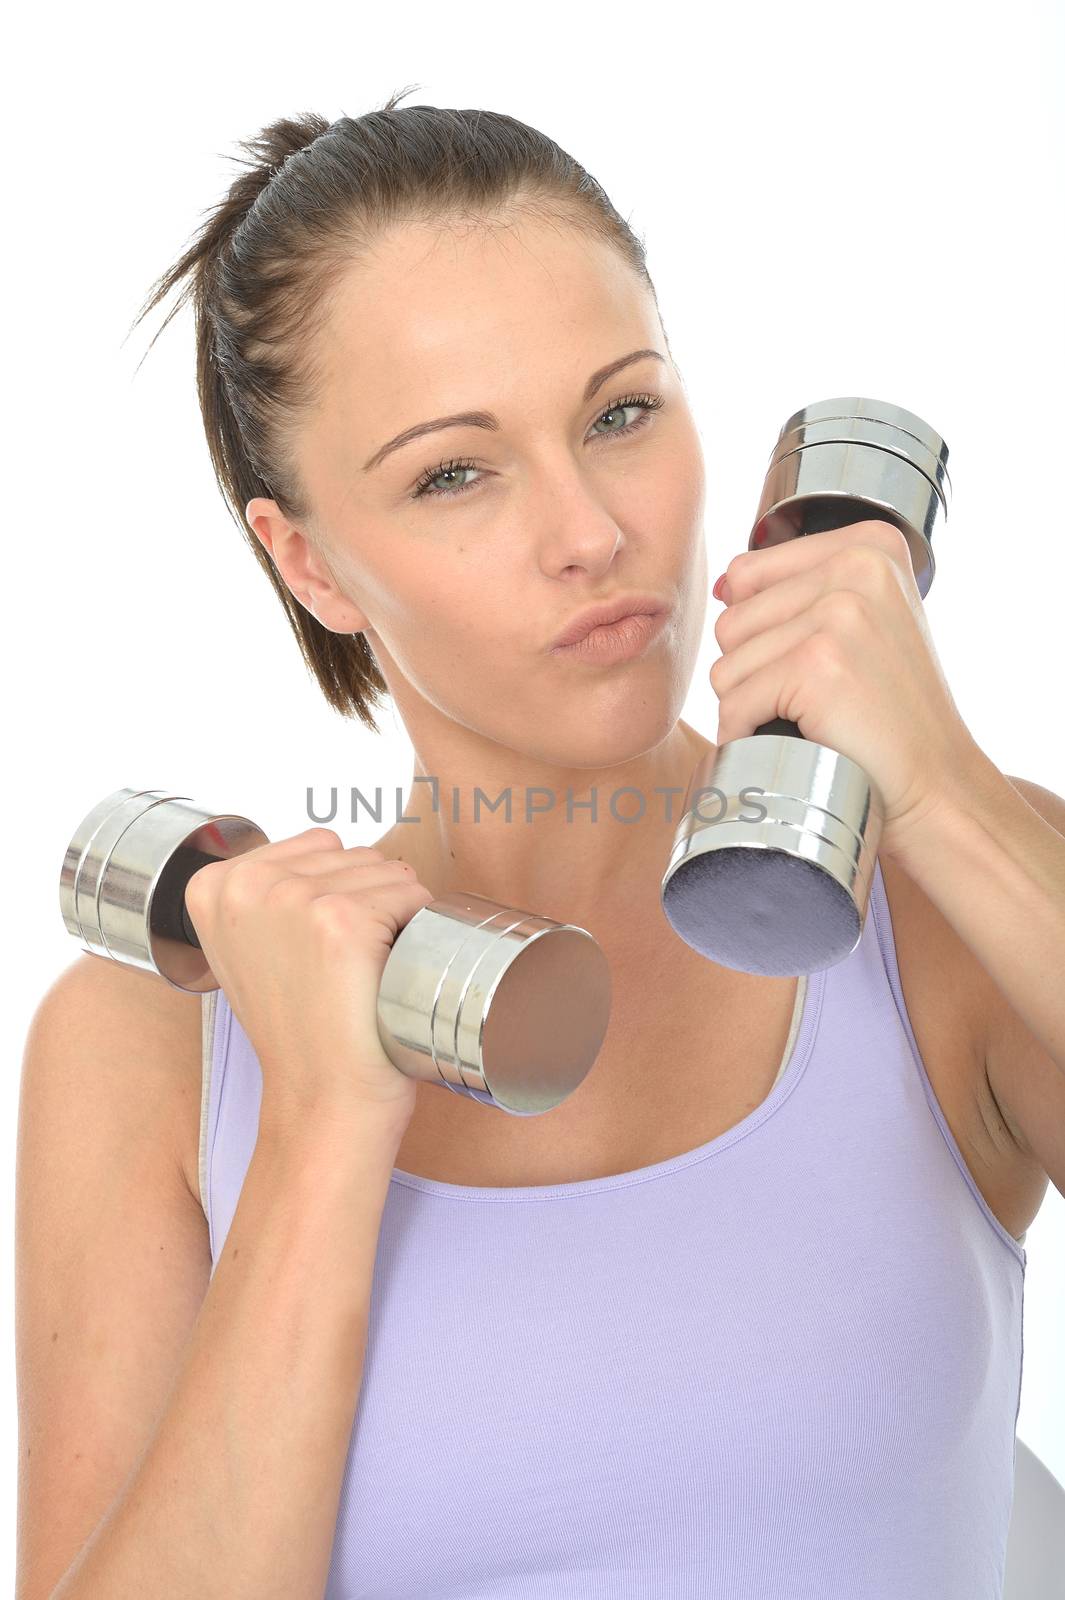 Healthy Aggressive Young Woman Training With Dumb Bell Weights Concentrating